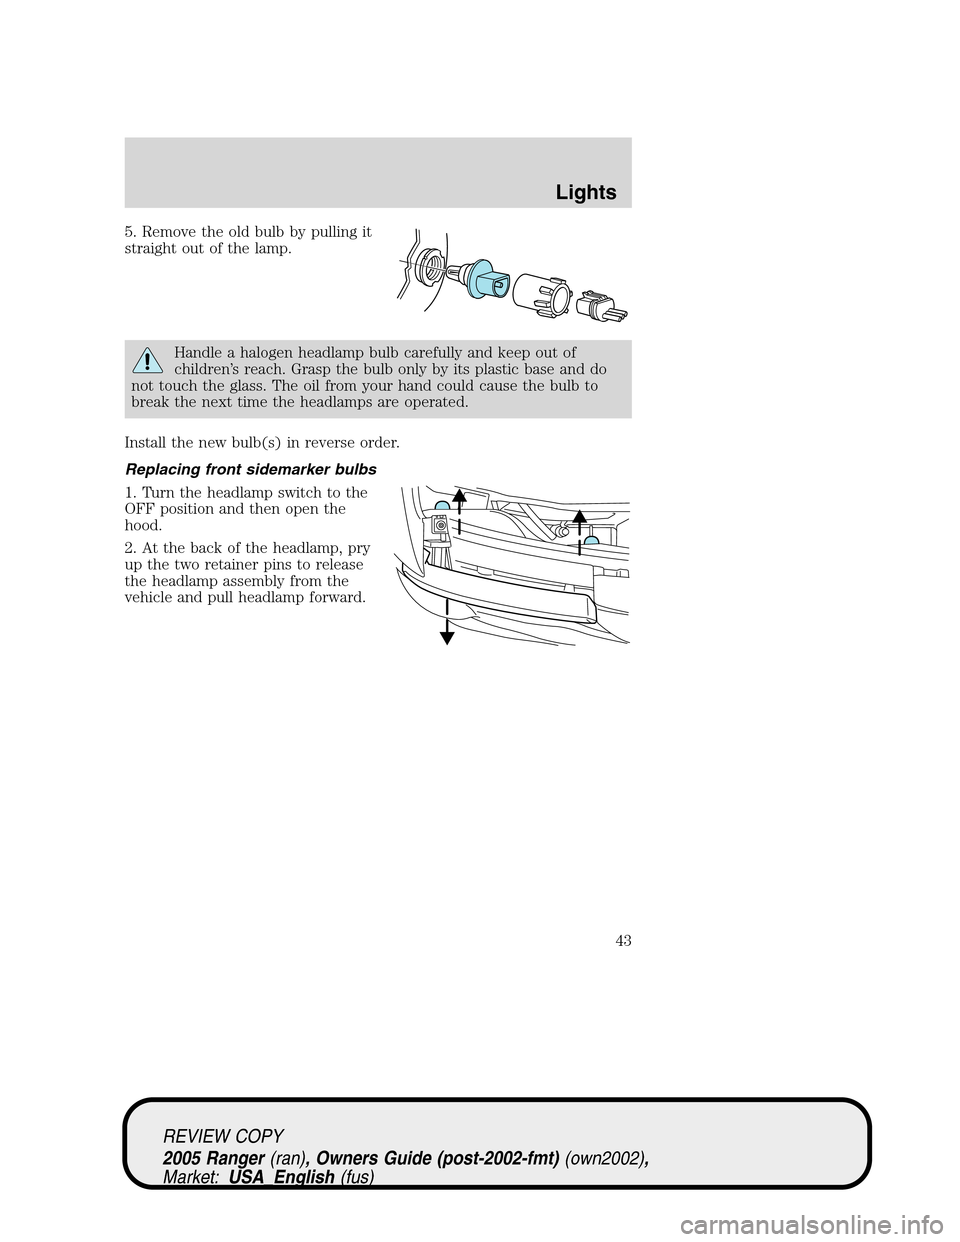 FORD RANGER 2005 2.G Service Manual 5. Remove the old bulb by pulling it
straight out of the lamp.
Handle a halogen headlamp bulb carefully and keep out of
children’s reach. Grasp the bulb only by its plastic base and do
not touch the